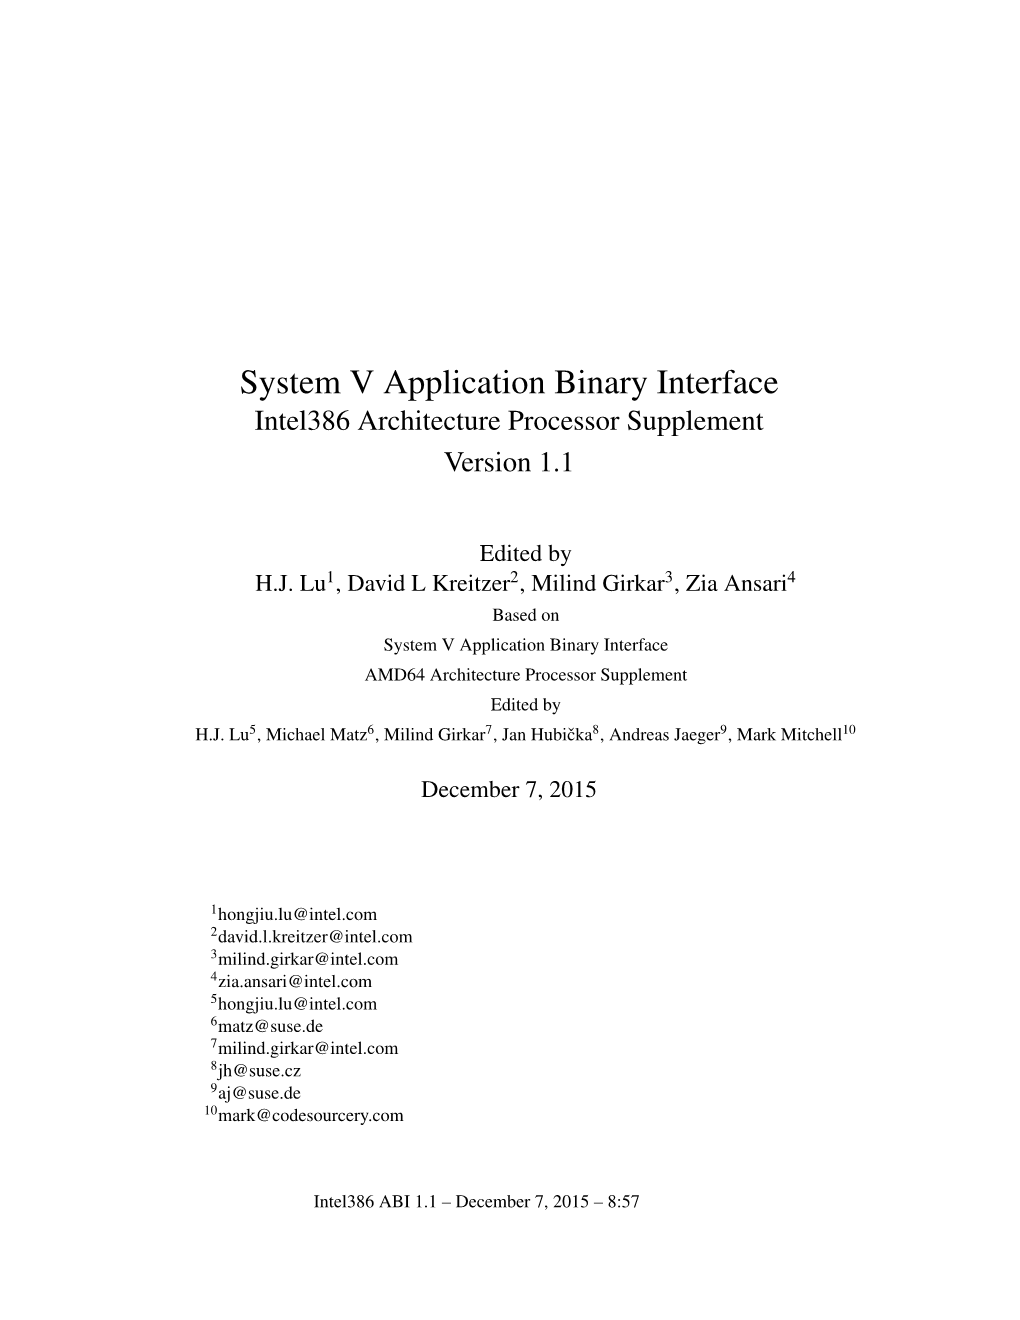 System V Application Binary Interface Intel386 Architecture Processor Supplement Version 1.1